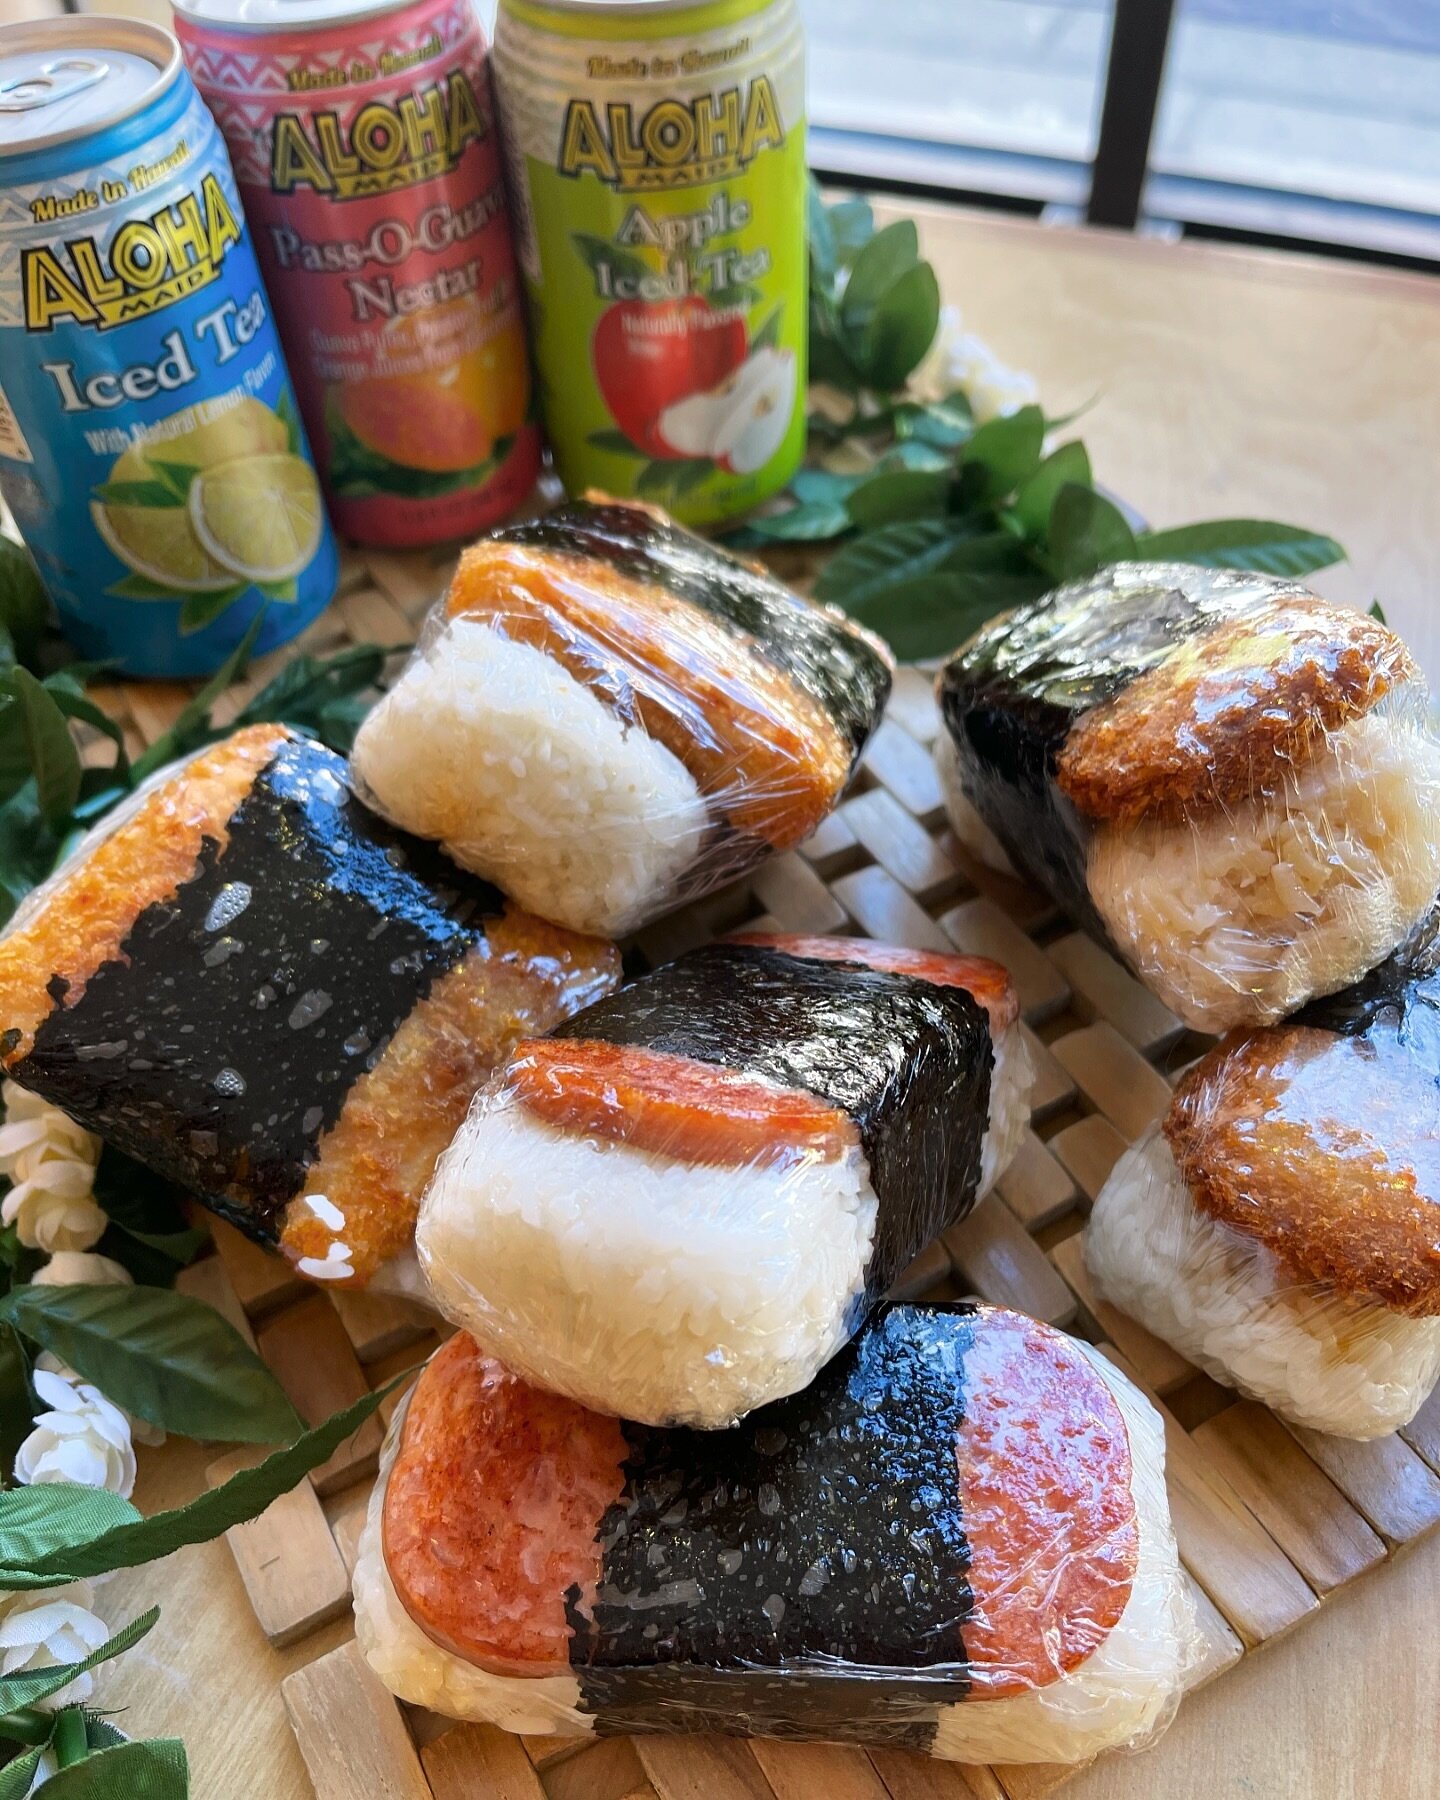 Musubi all day 🤙🏽 made-to-order 🤙🏽 which kine&rsquo; you craving today? #AlohaEats #spammusubi #AlohaMaid #hawaiianfood #chicagofood #eaterchicago